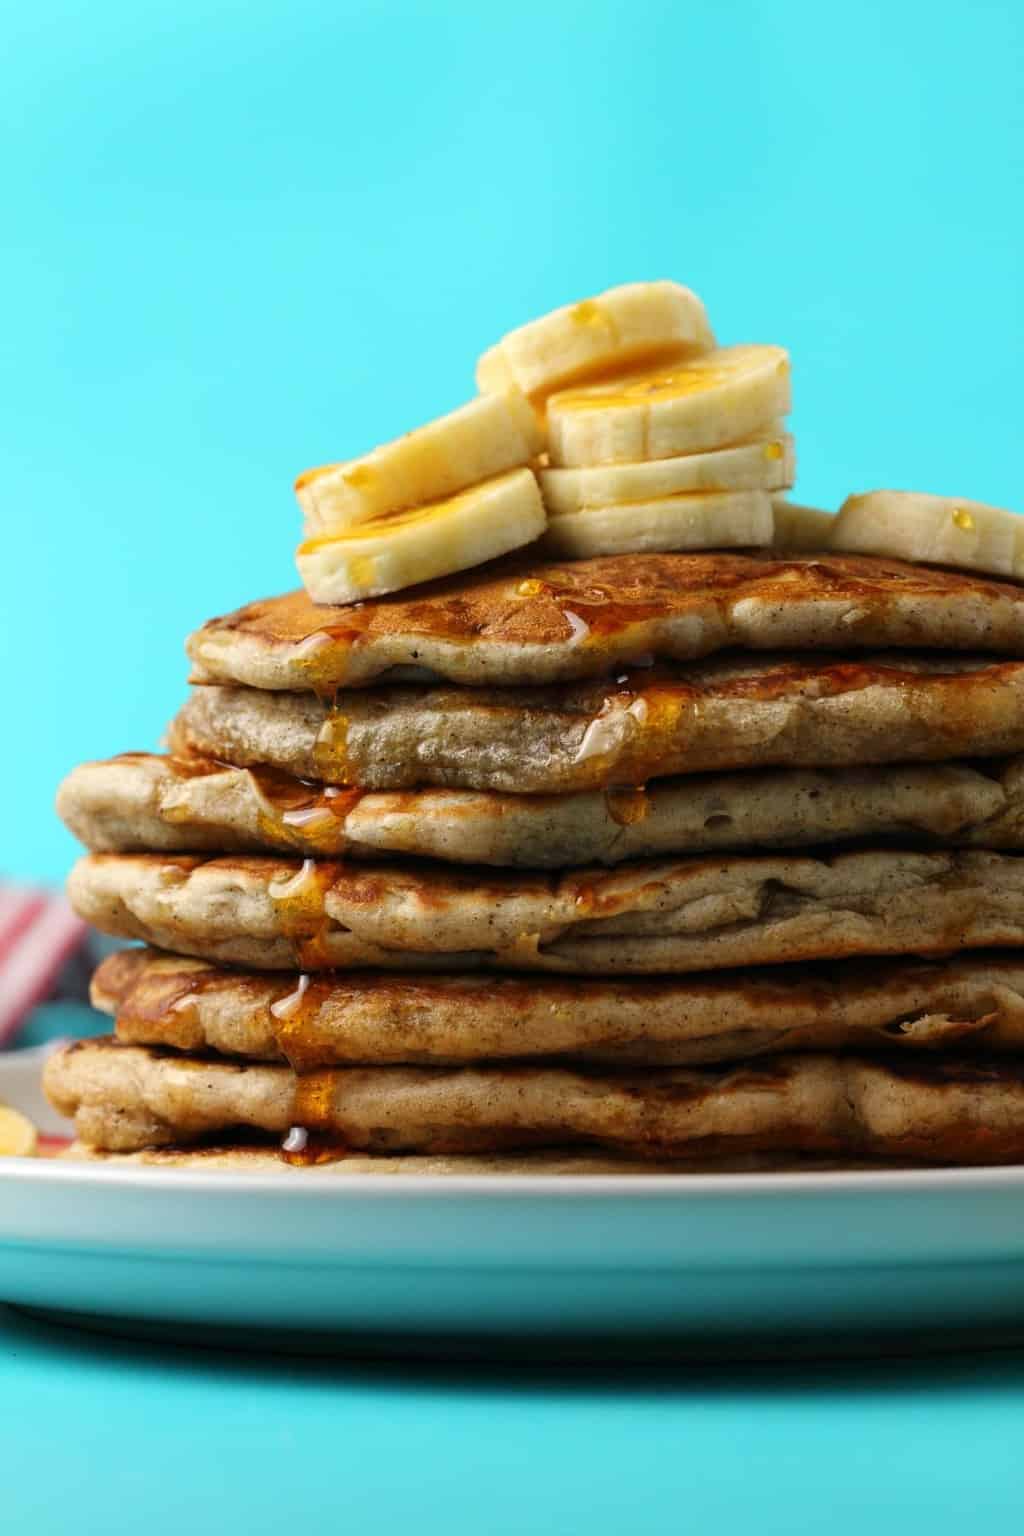 Pancakes banana vegan breakfast though absolutely spin texture strong spot chocolate game these their off